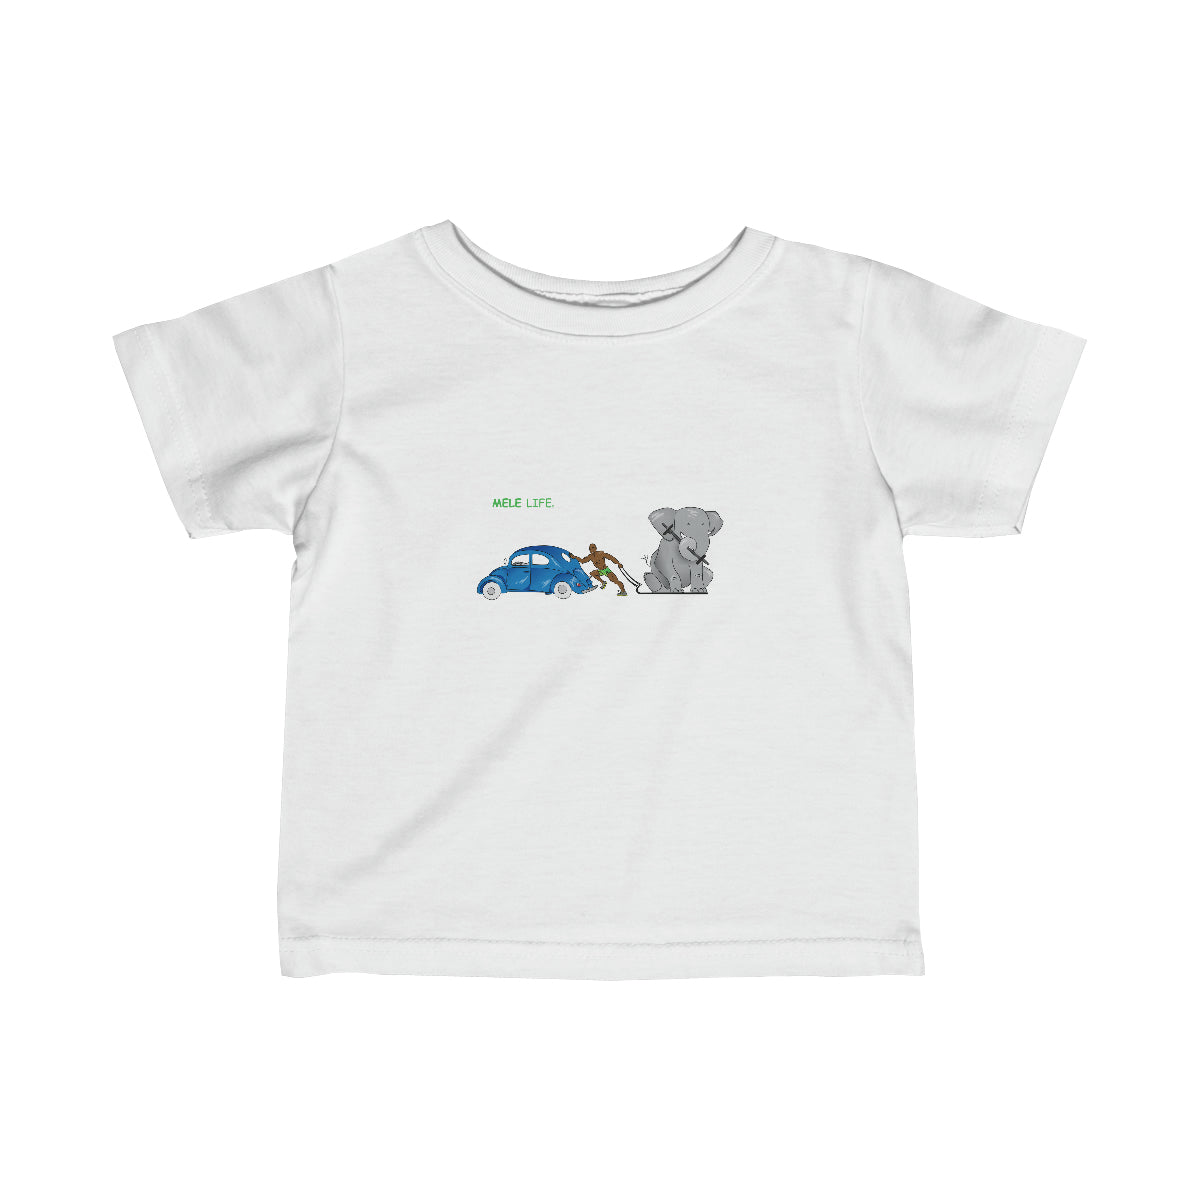 Infant Tee - Strong Black Man